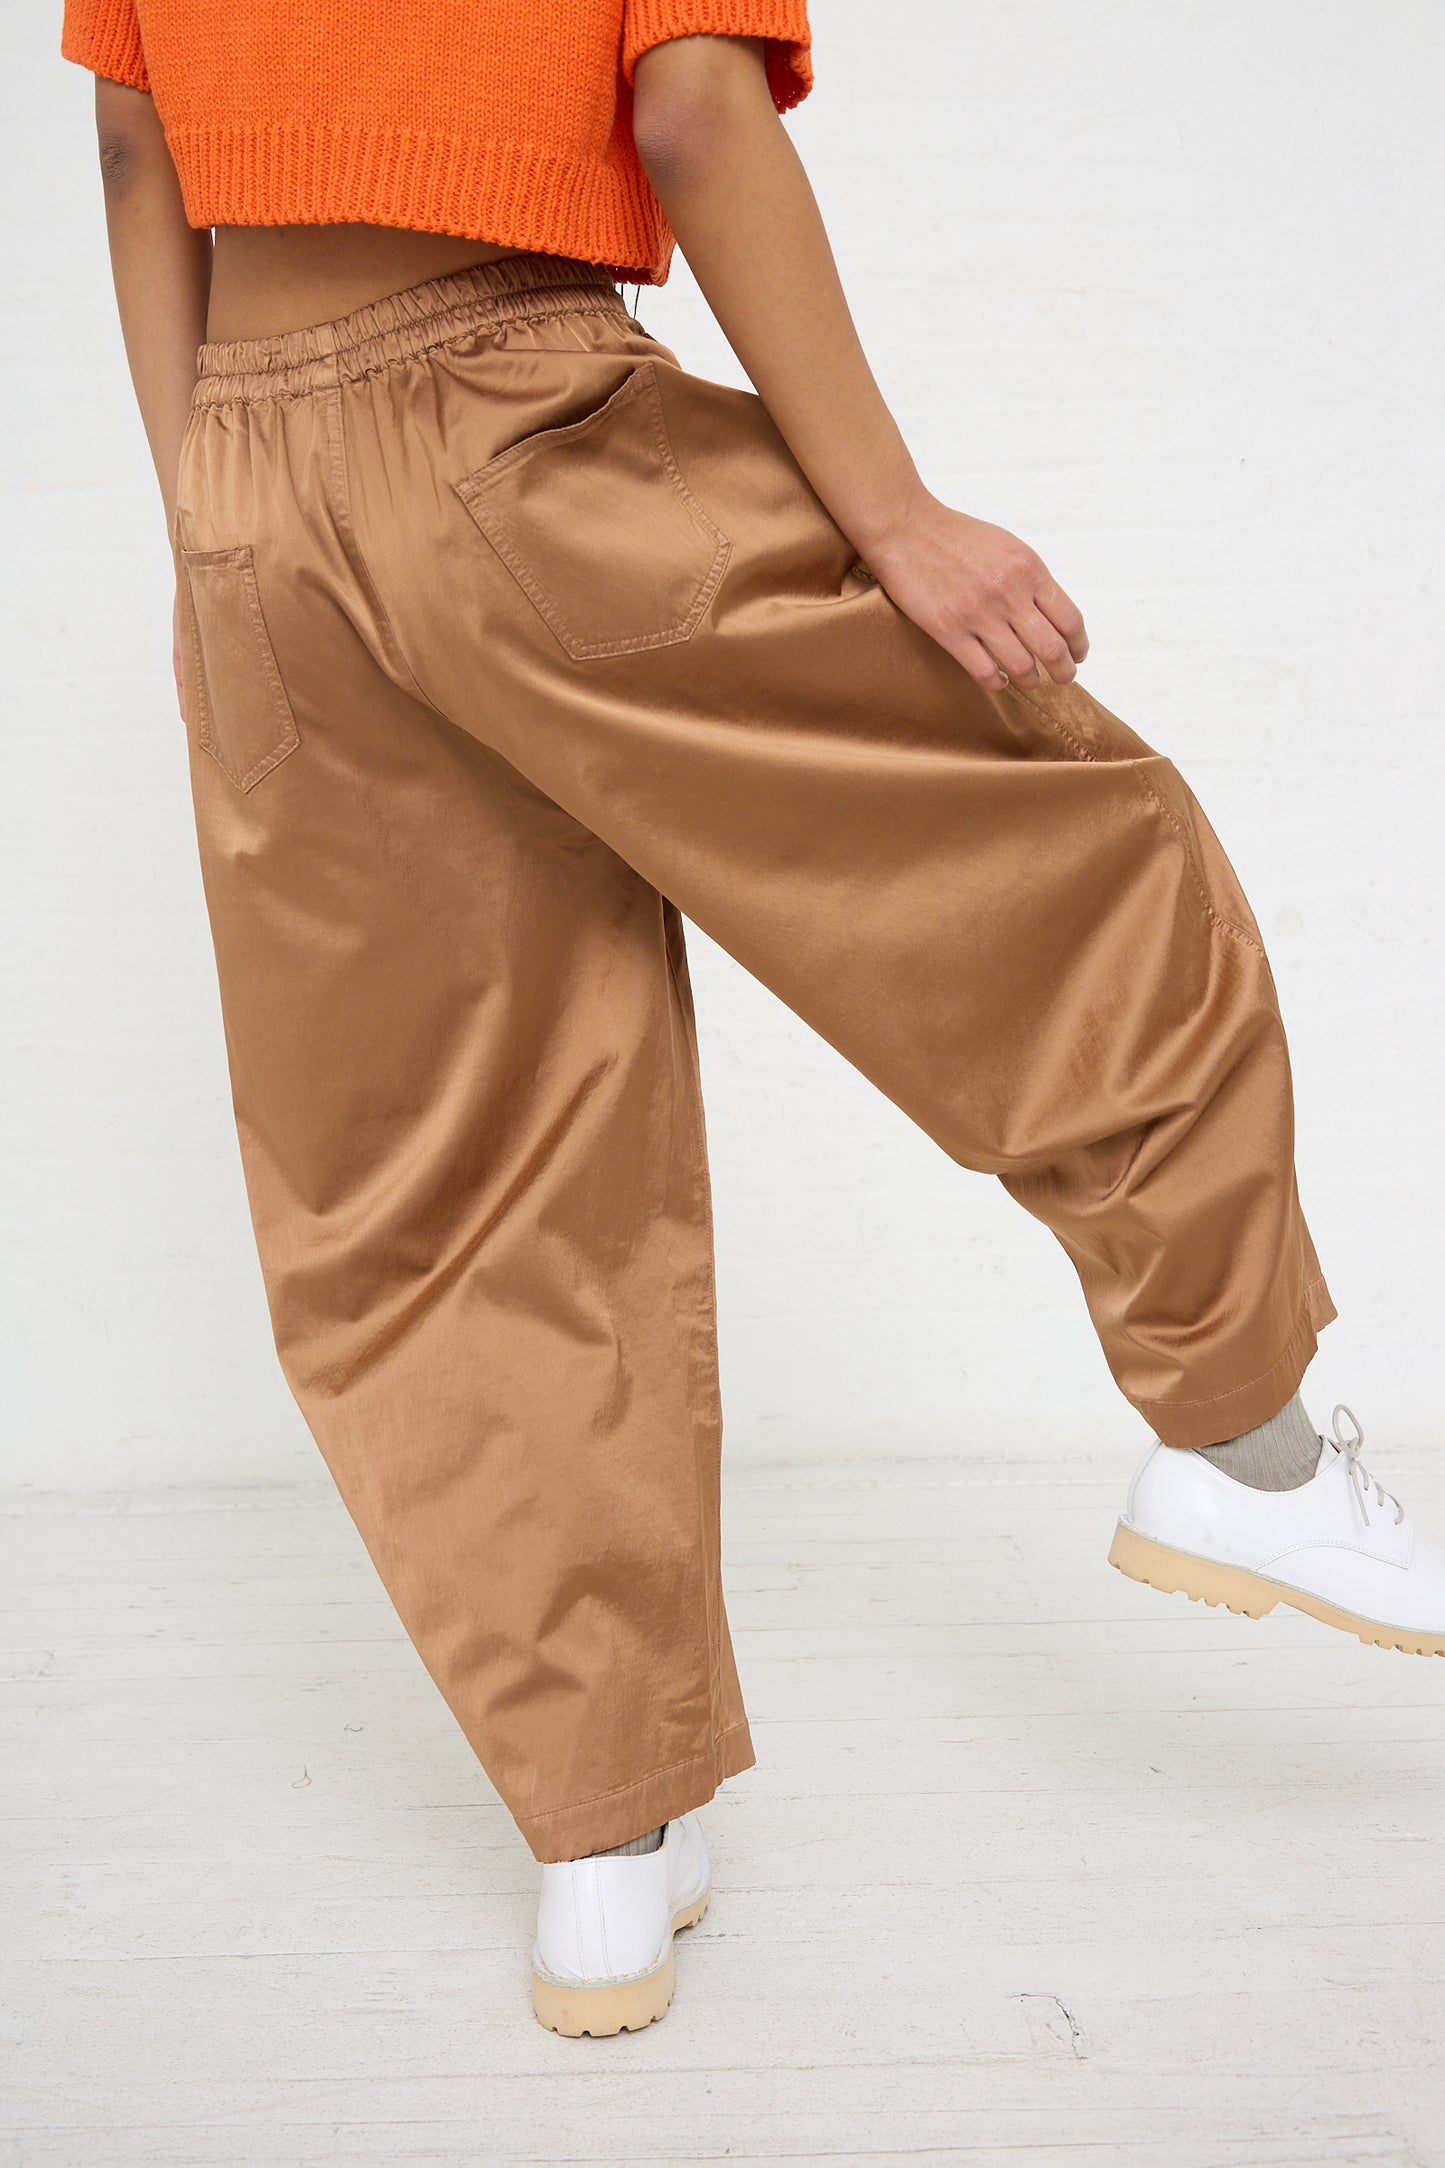 Woman wearing Cordera's Satin Curved Pant in Camel and white sneakers.